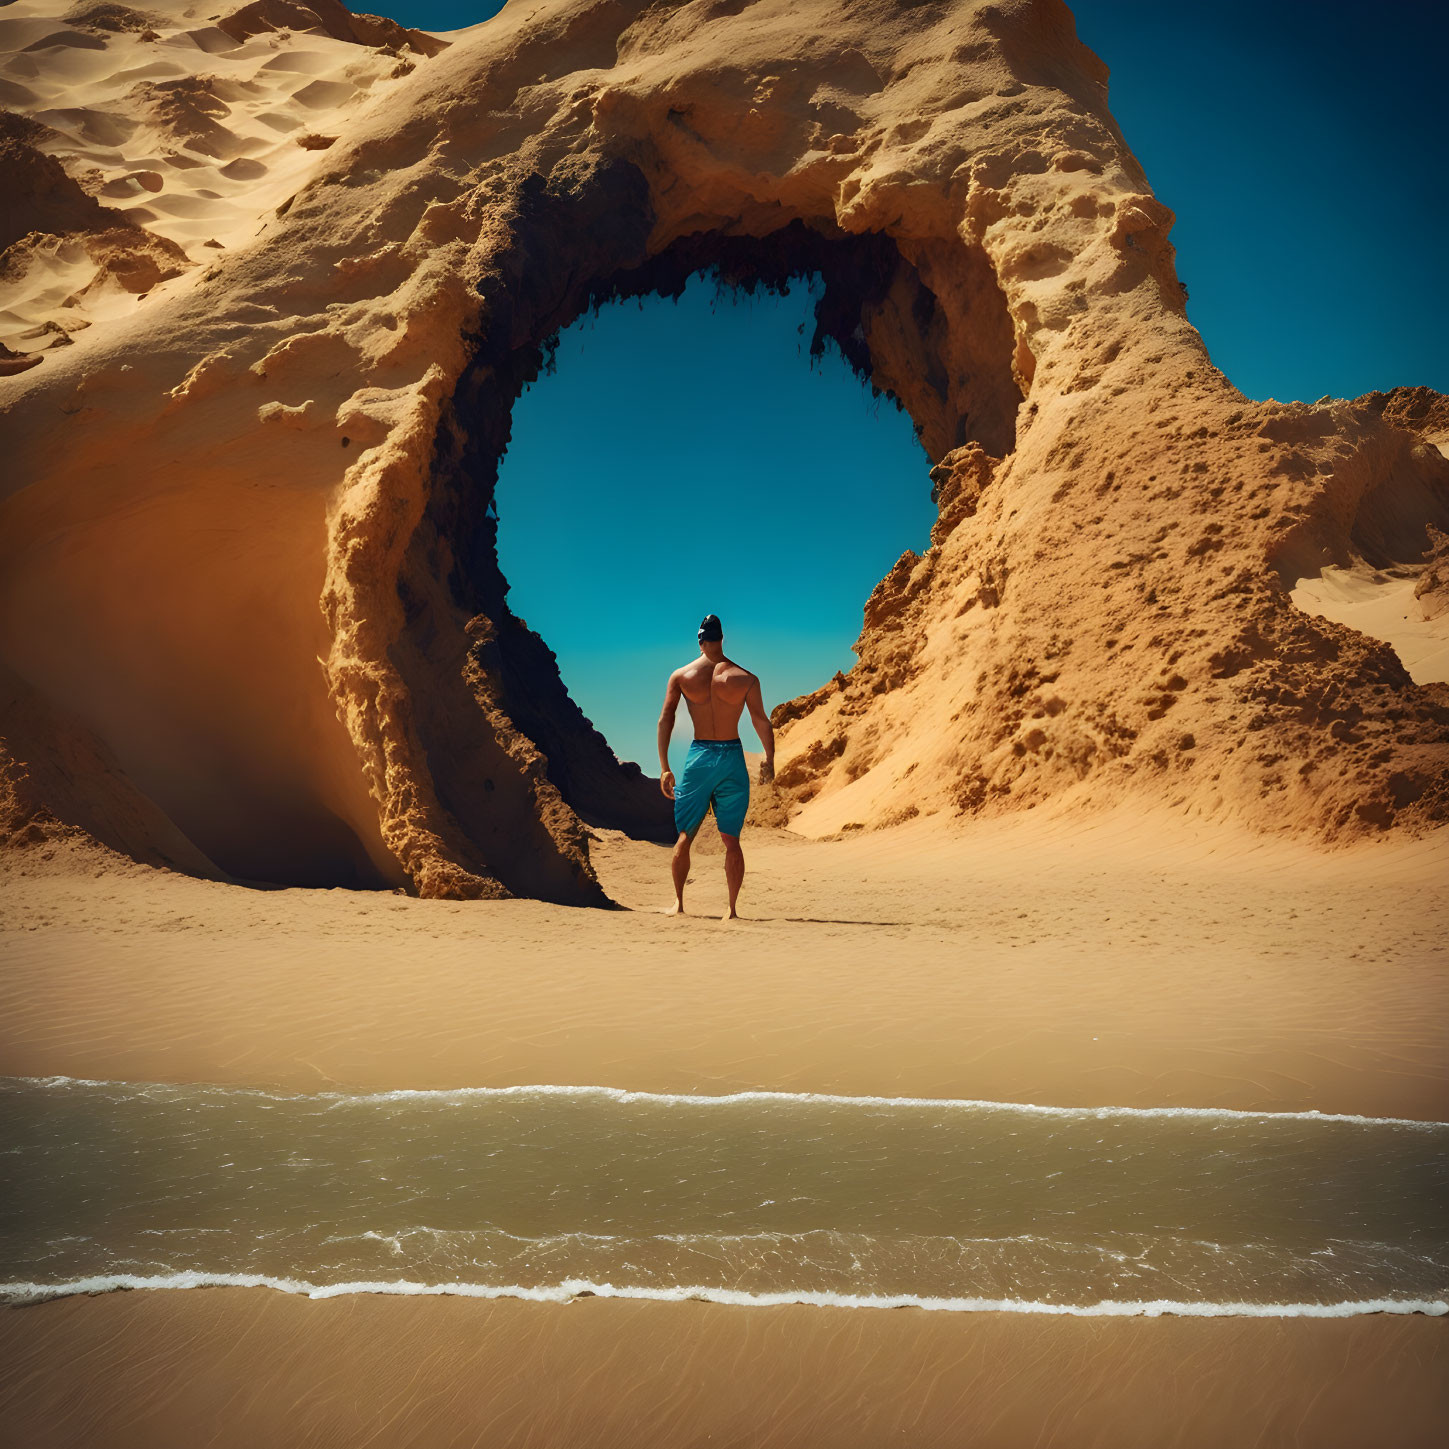 Person standing under large natural arch on sandy beach with clear blue sky